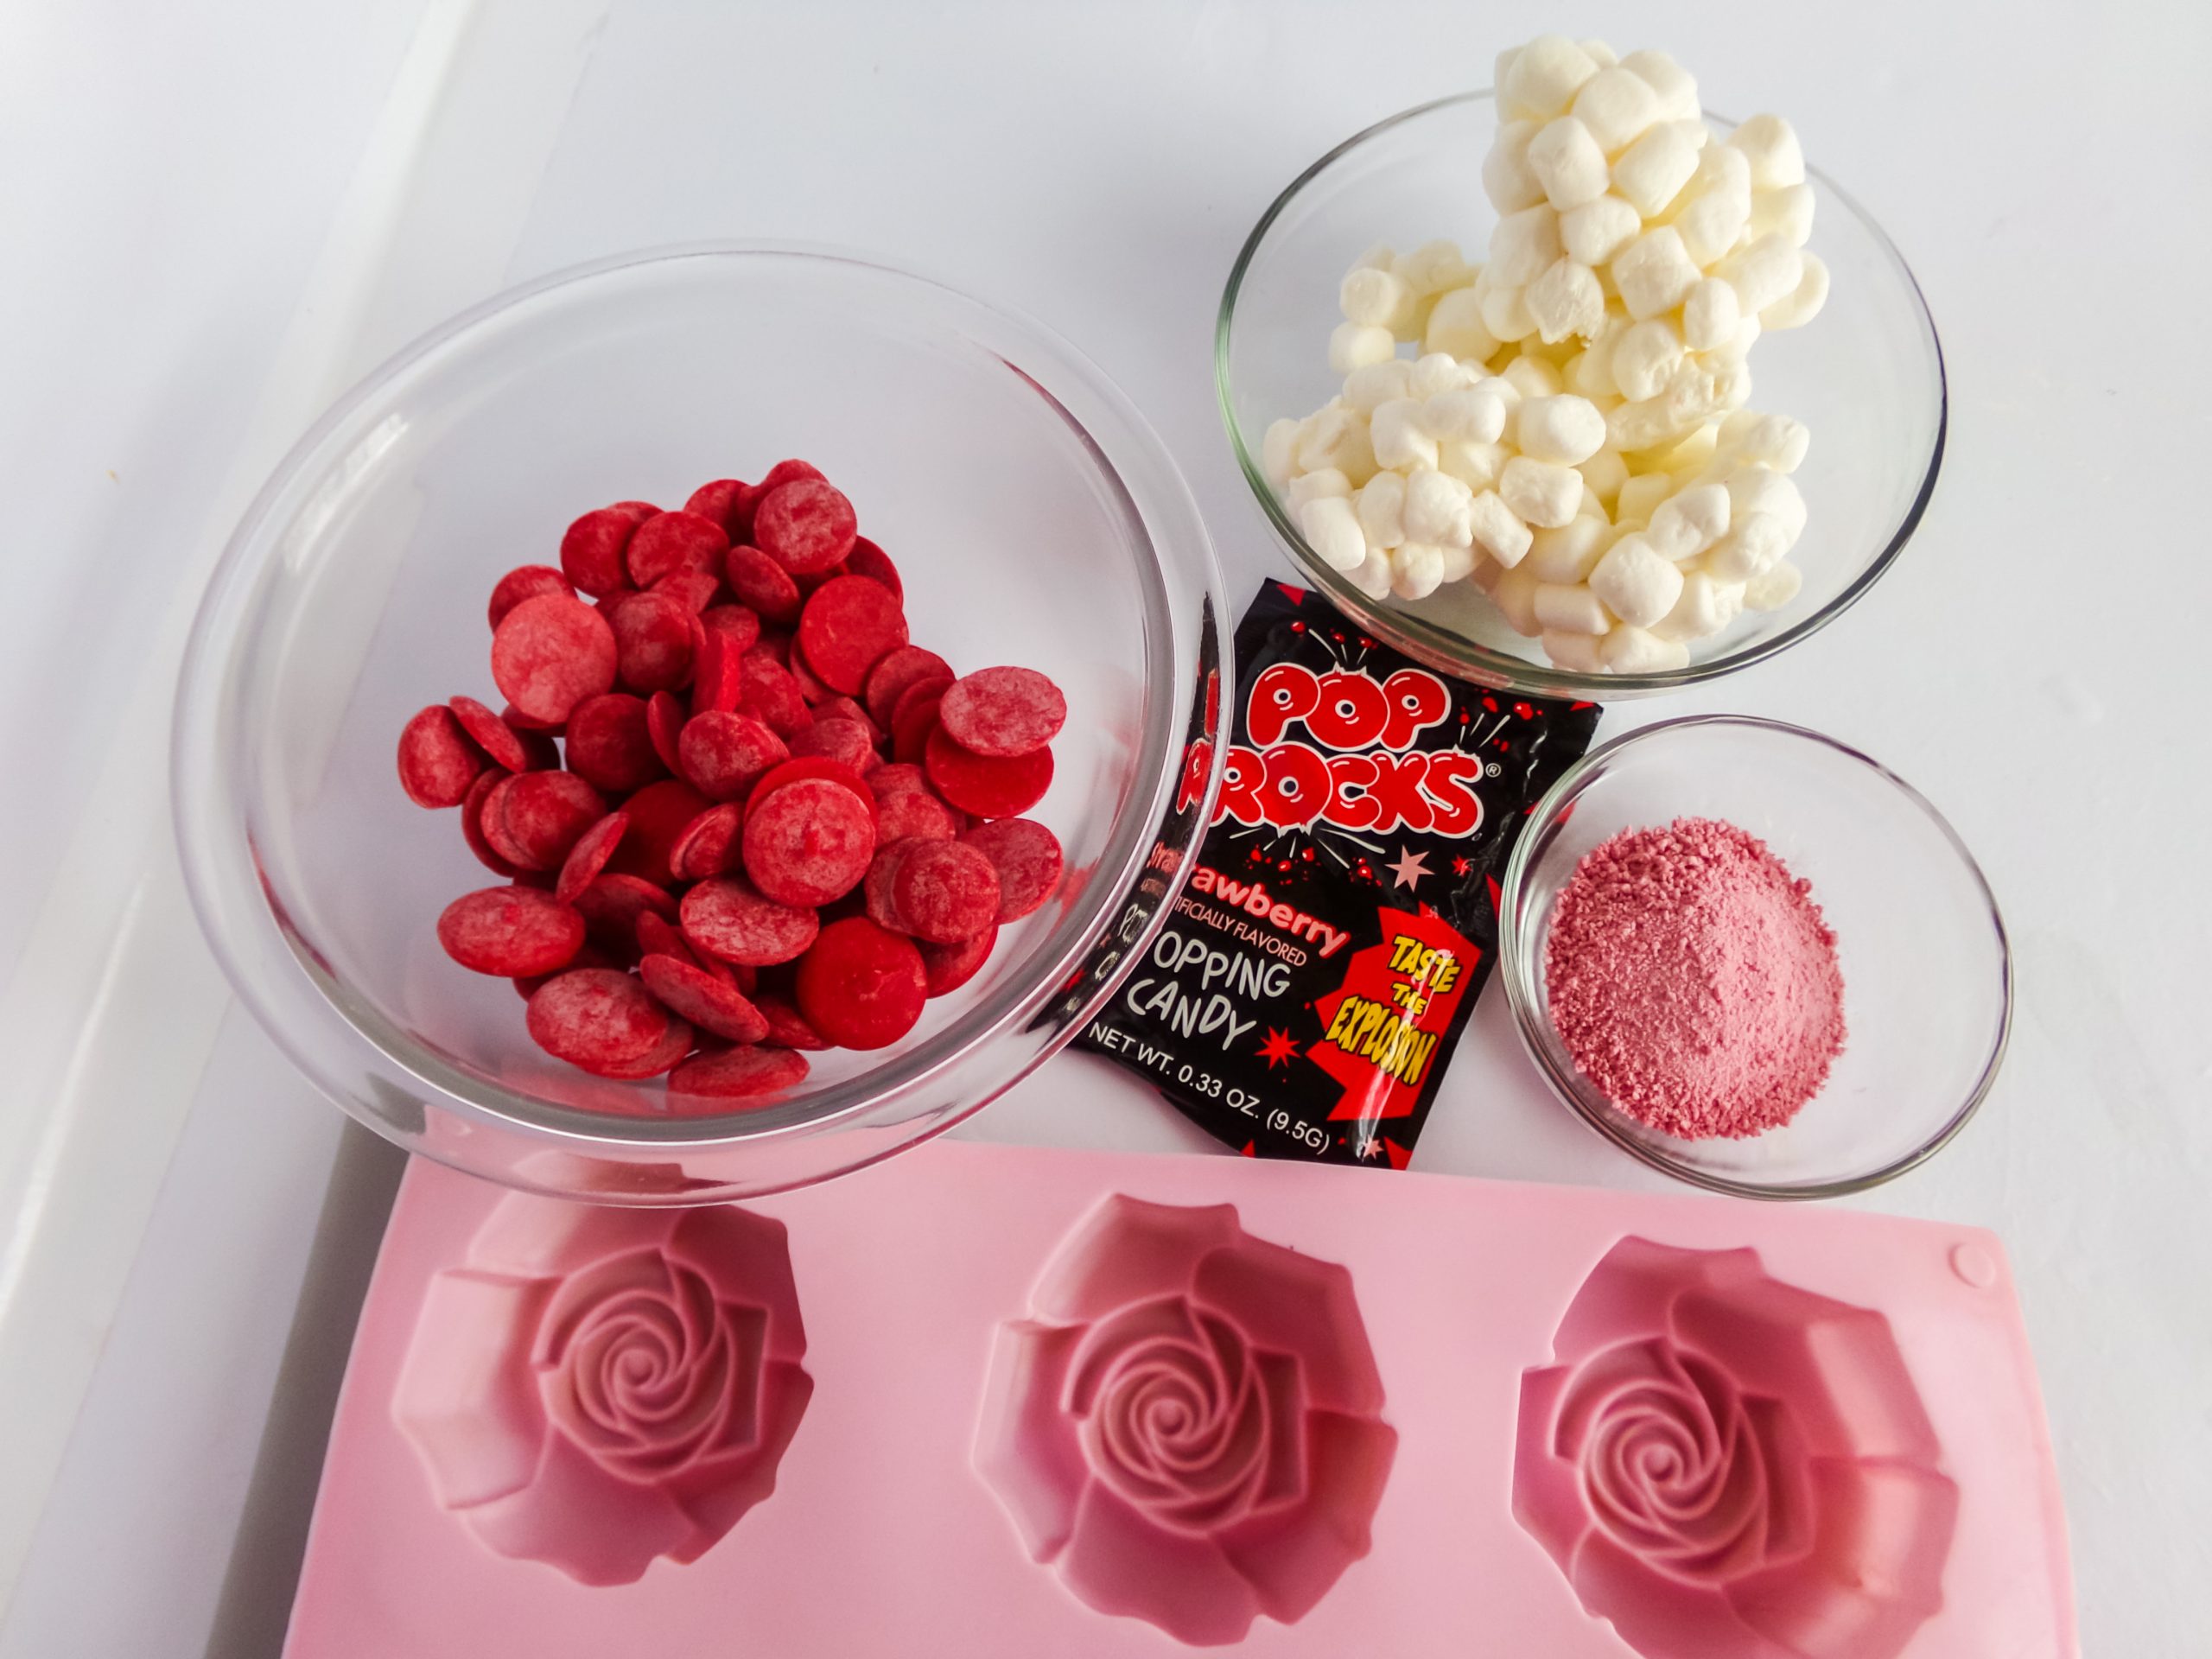 a bowl of red candy melts, a bowl of mini marshmallows, a packet of strawberry Pop Rocks (with the contents poured into a small bowl), and a rose-shaped silicone mold